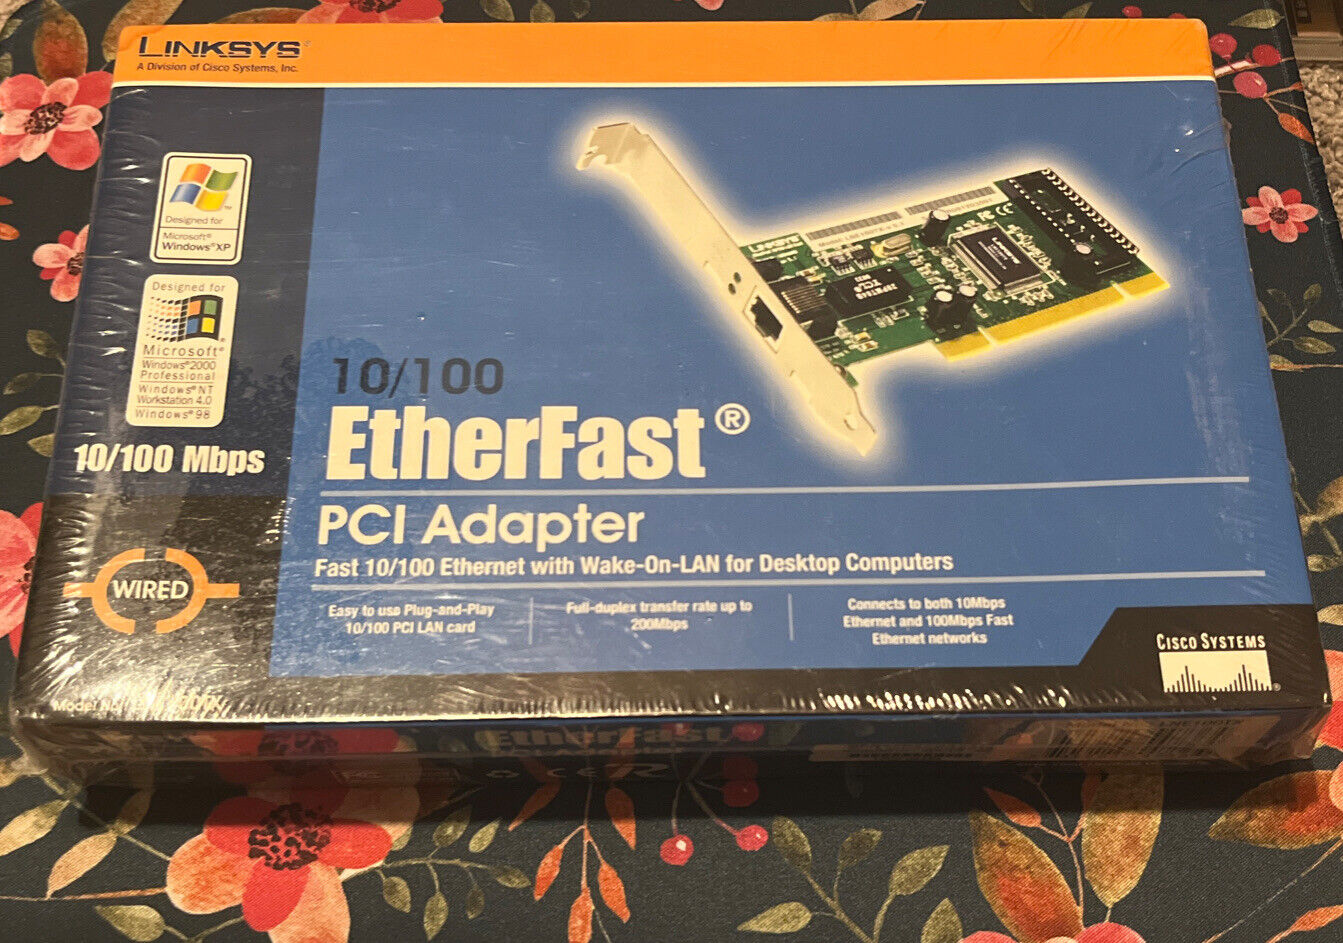 Linksys 10/100 Ether Fast PCI Adapter Ethernet Lan Card for Desktop Computers(A)